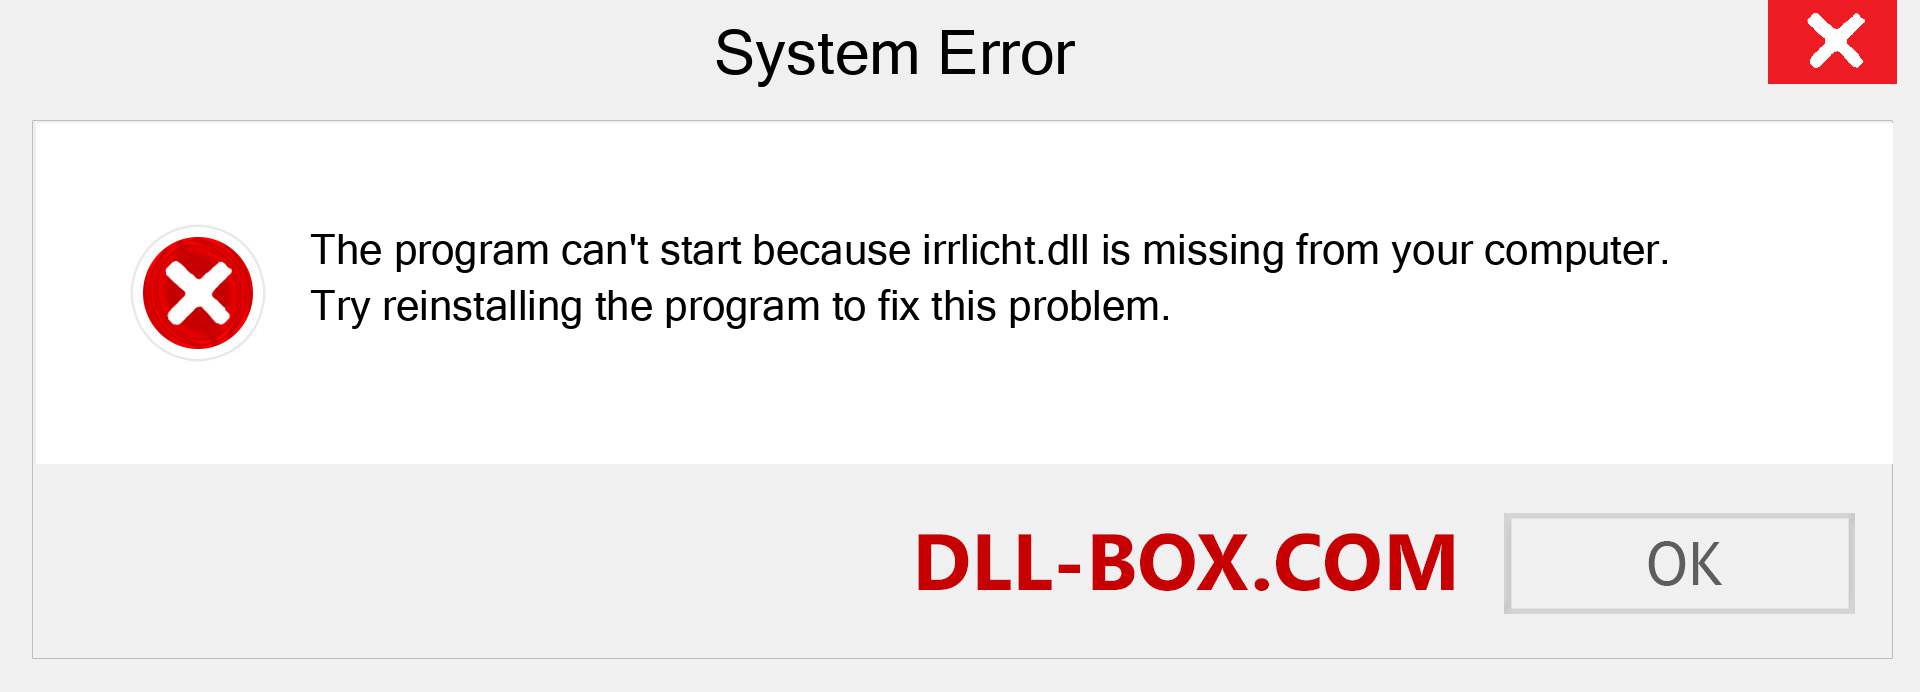  irrlicht.dll file is missing?. Download for Windows 7, 8, 10 - Fix  irrlicht dll Missing Error on Windows, photos, images